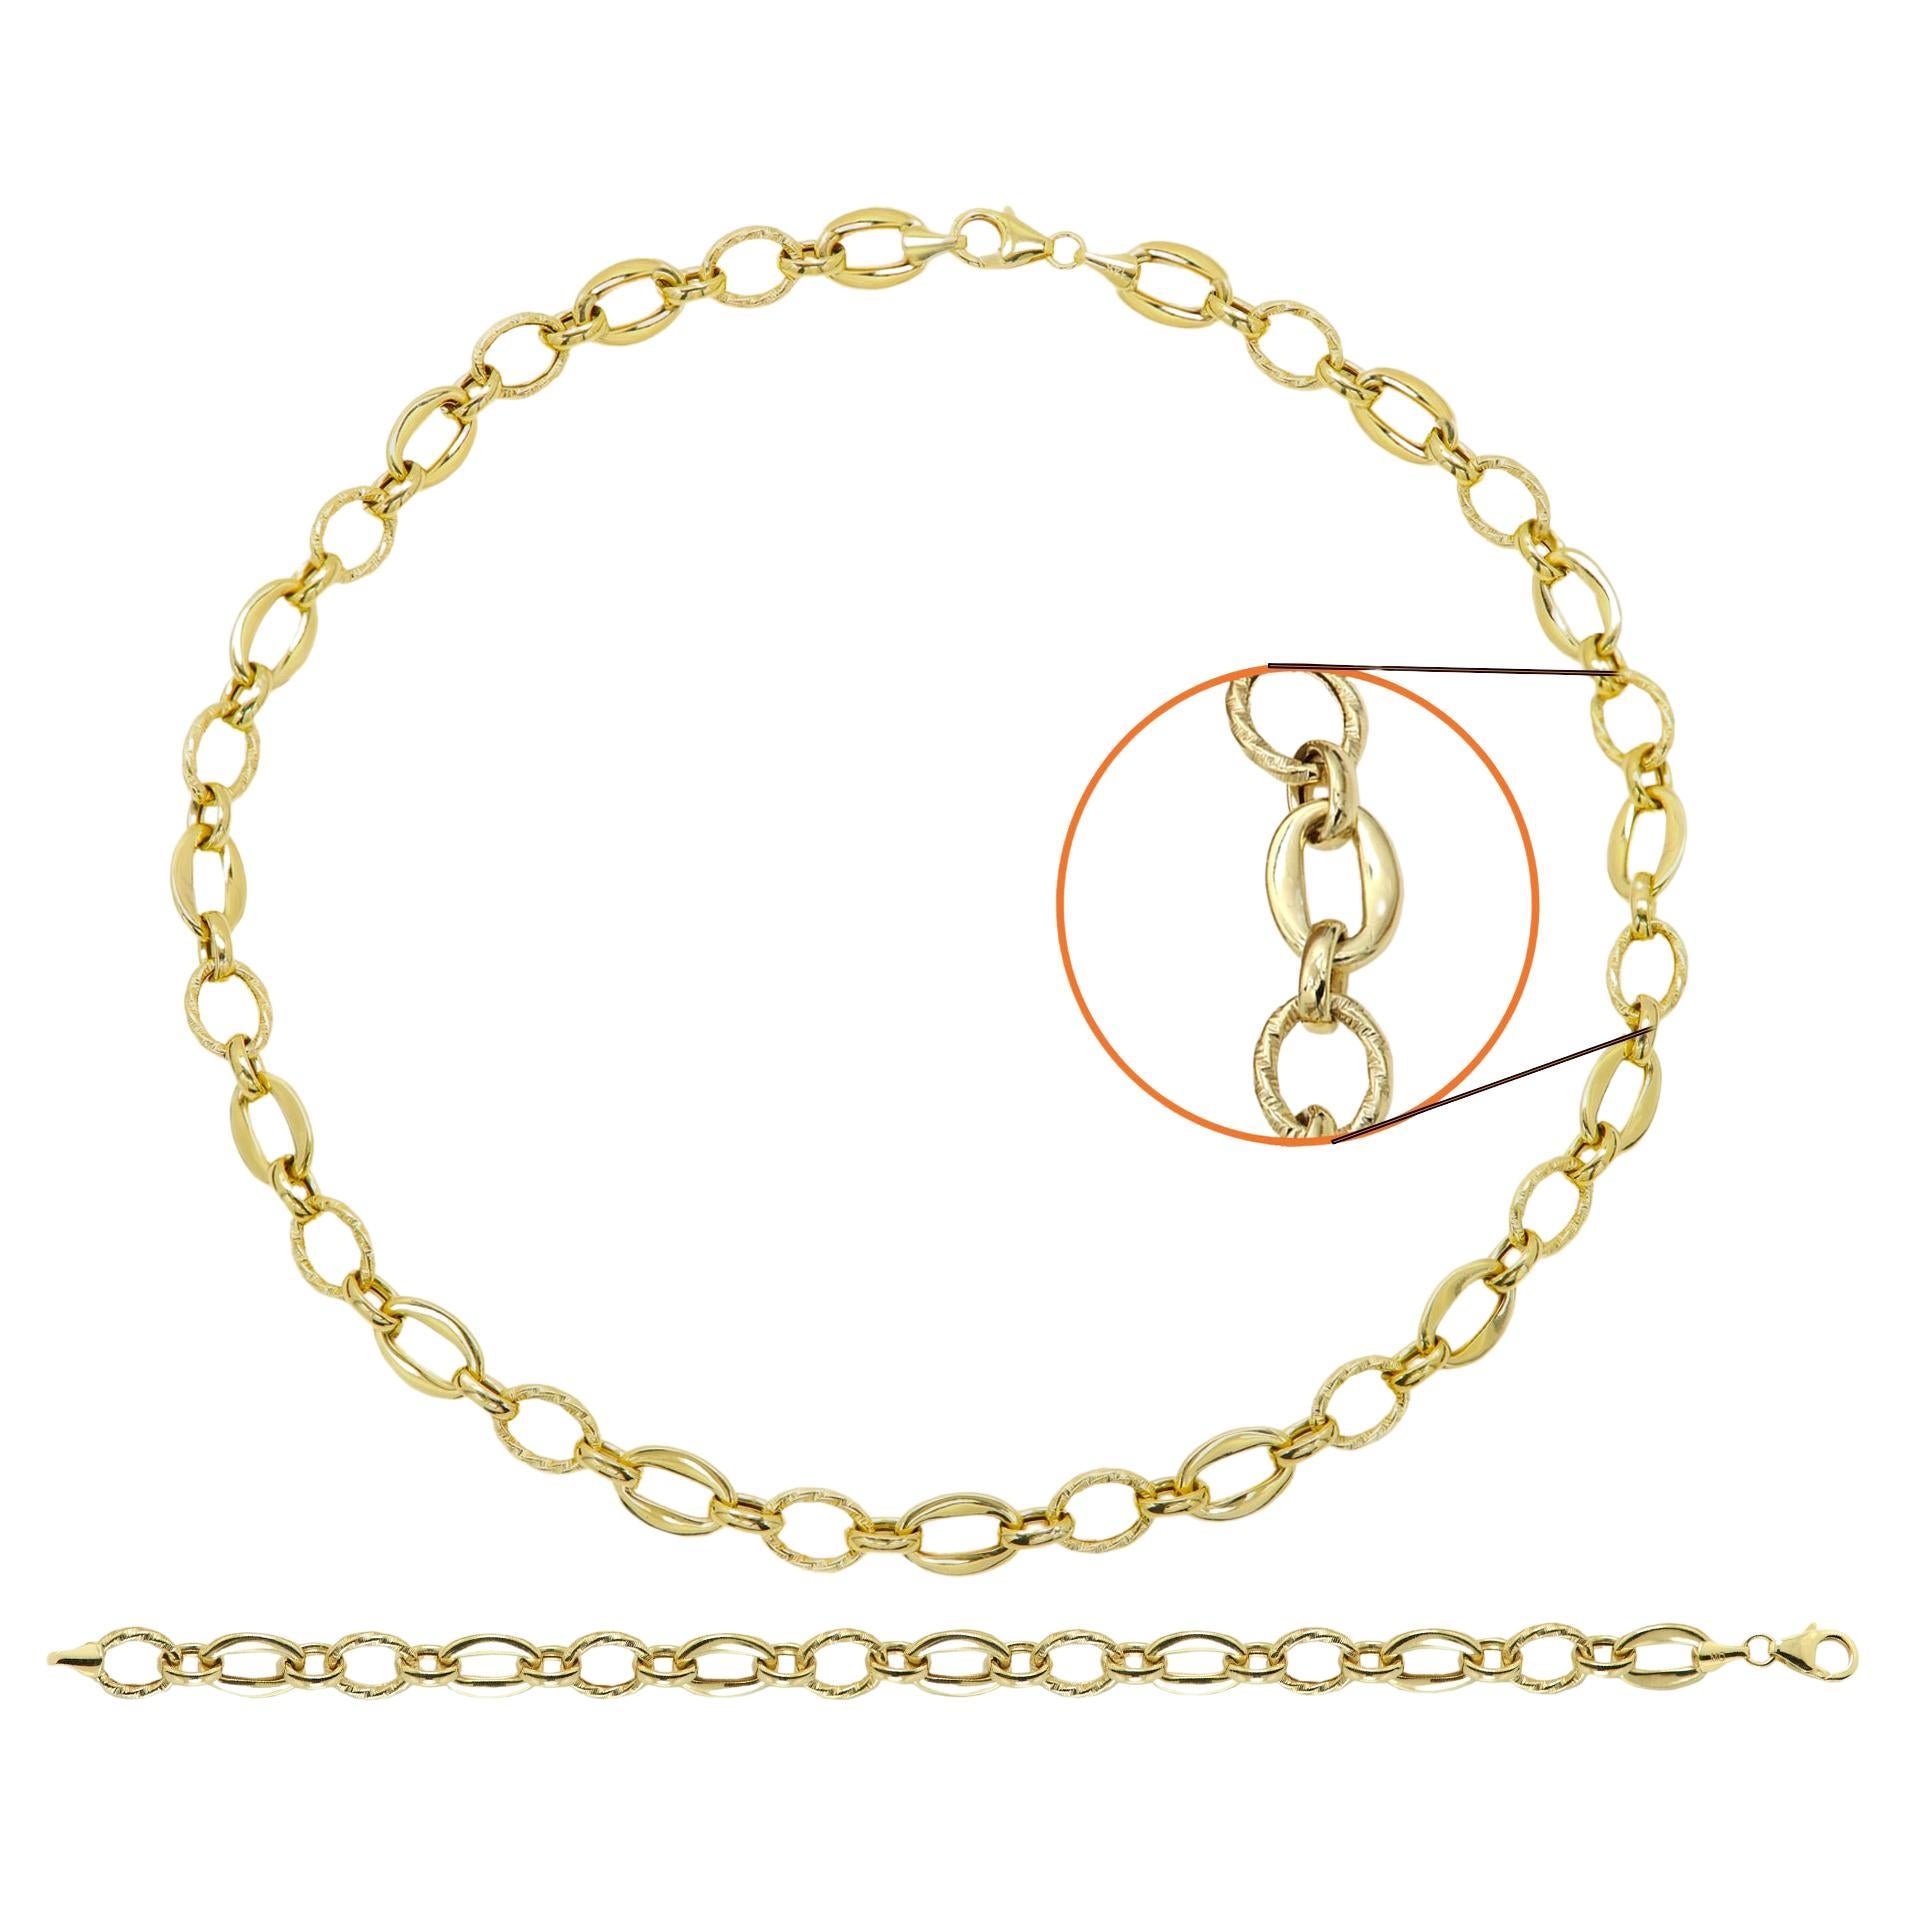 Italian Creative Link Chain set Necklace and Bracelet 14 Karat Yellow Gold Links For Sale